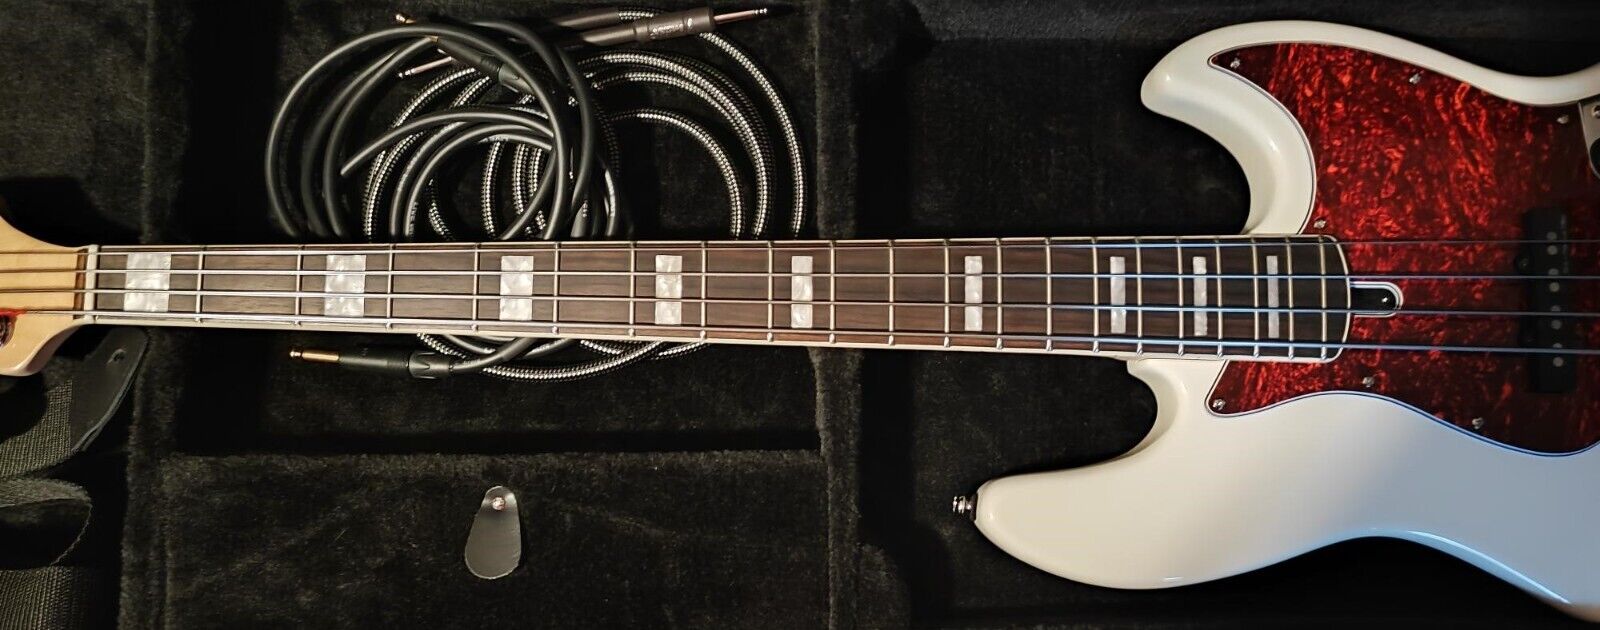 New 2023 Antique White "SIRE MARCUS MILLER V7 ACTIVE" Jazz Bass w/Hardshell Case "SIRE MARCUS MILLER" "SIRE MARCUS MILLER JAZZ BASS - фотография #7